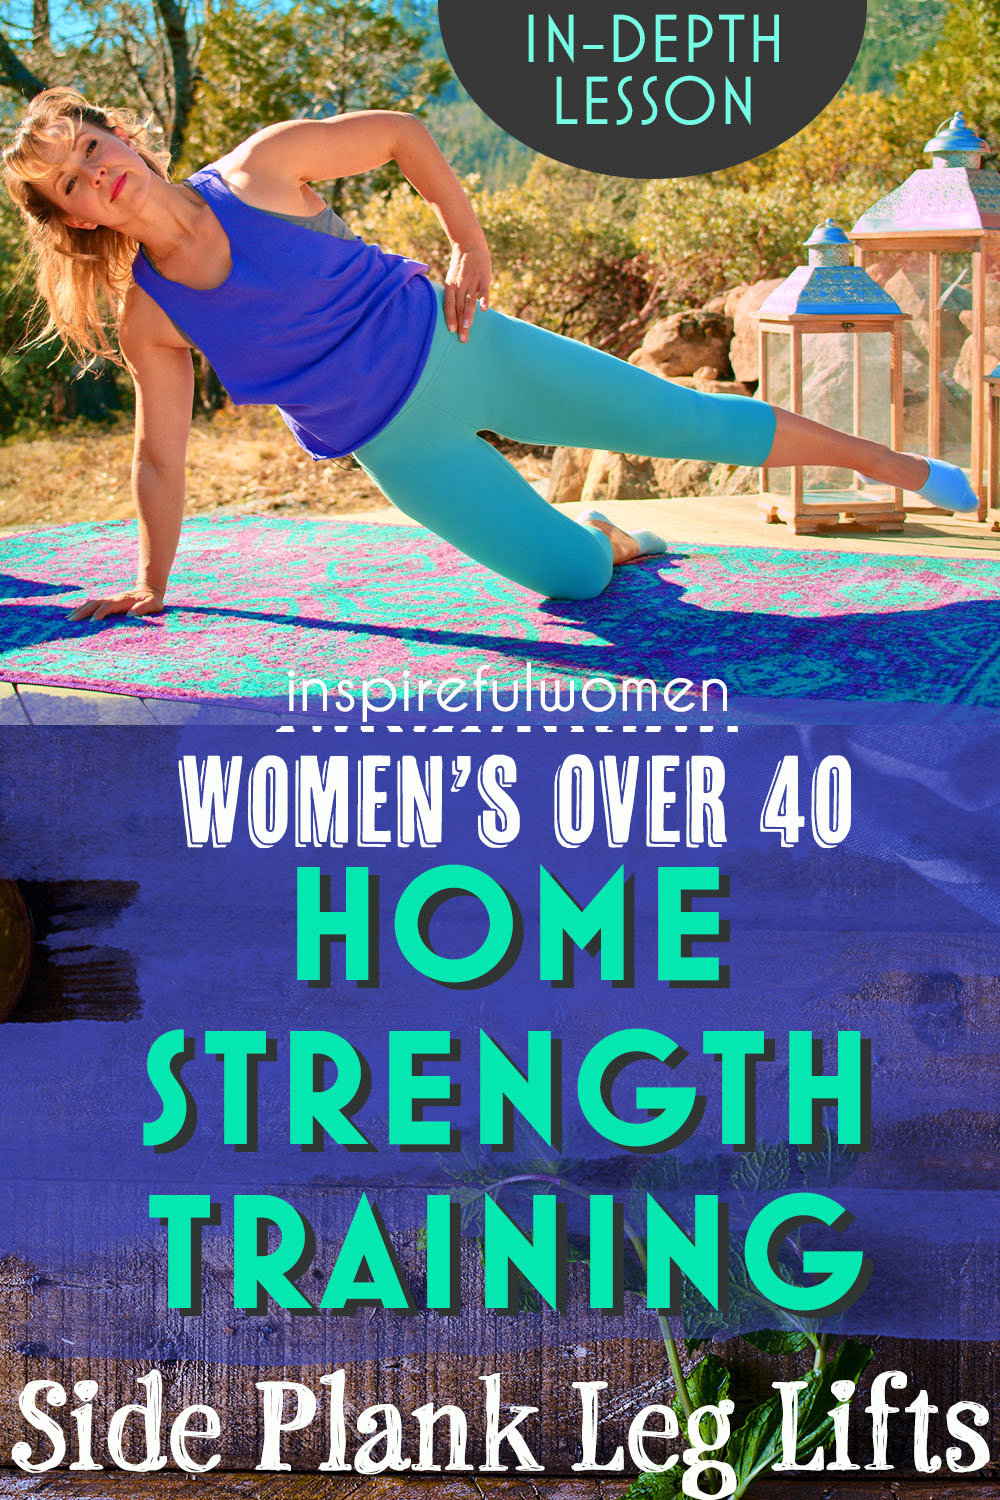 side-plank-leg-lifts-glute-strength-training-at-home-for-women-above-40